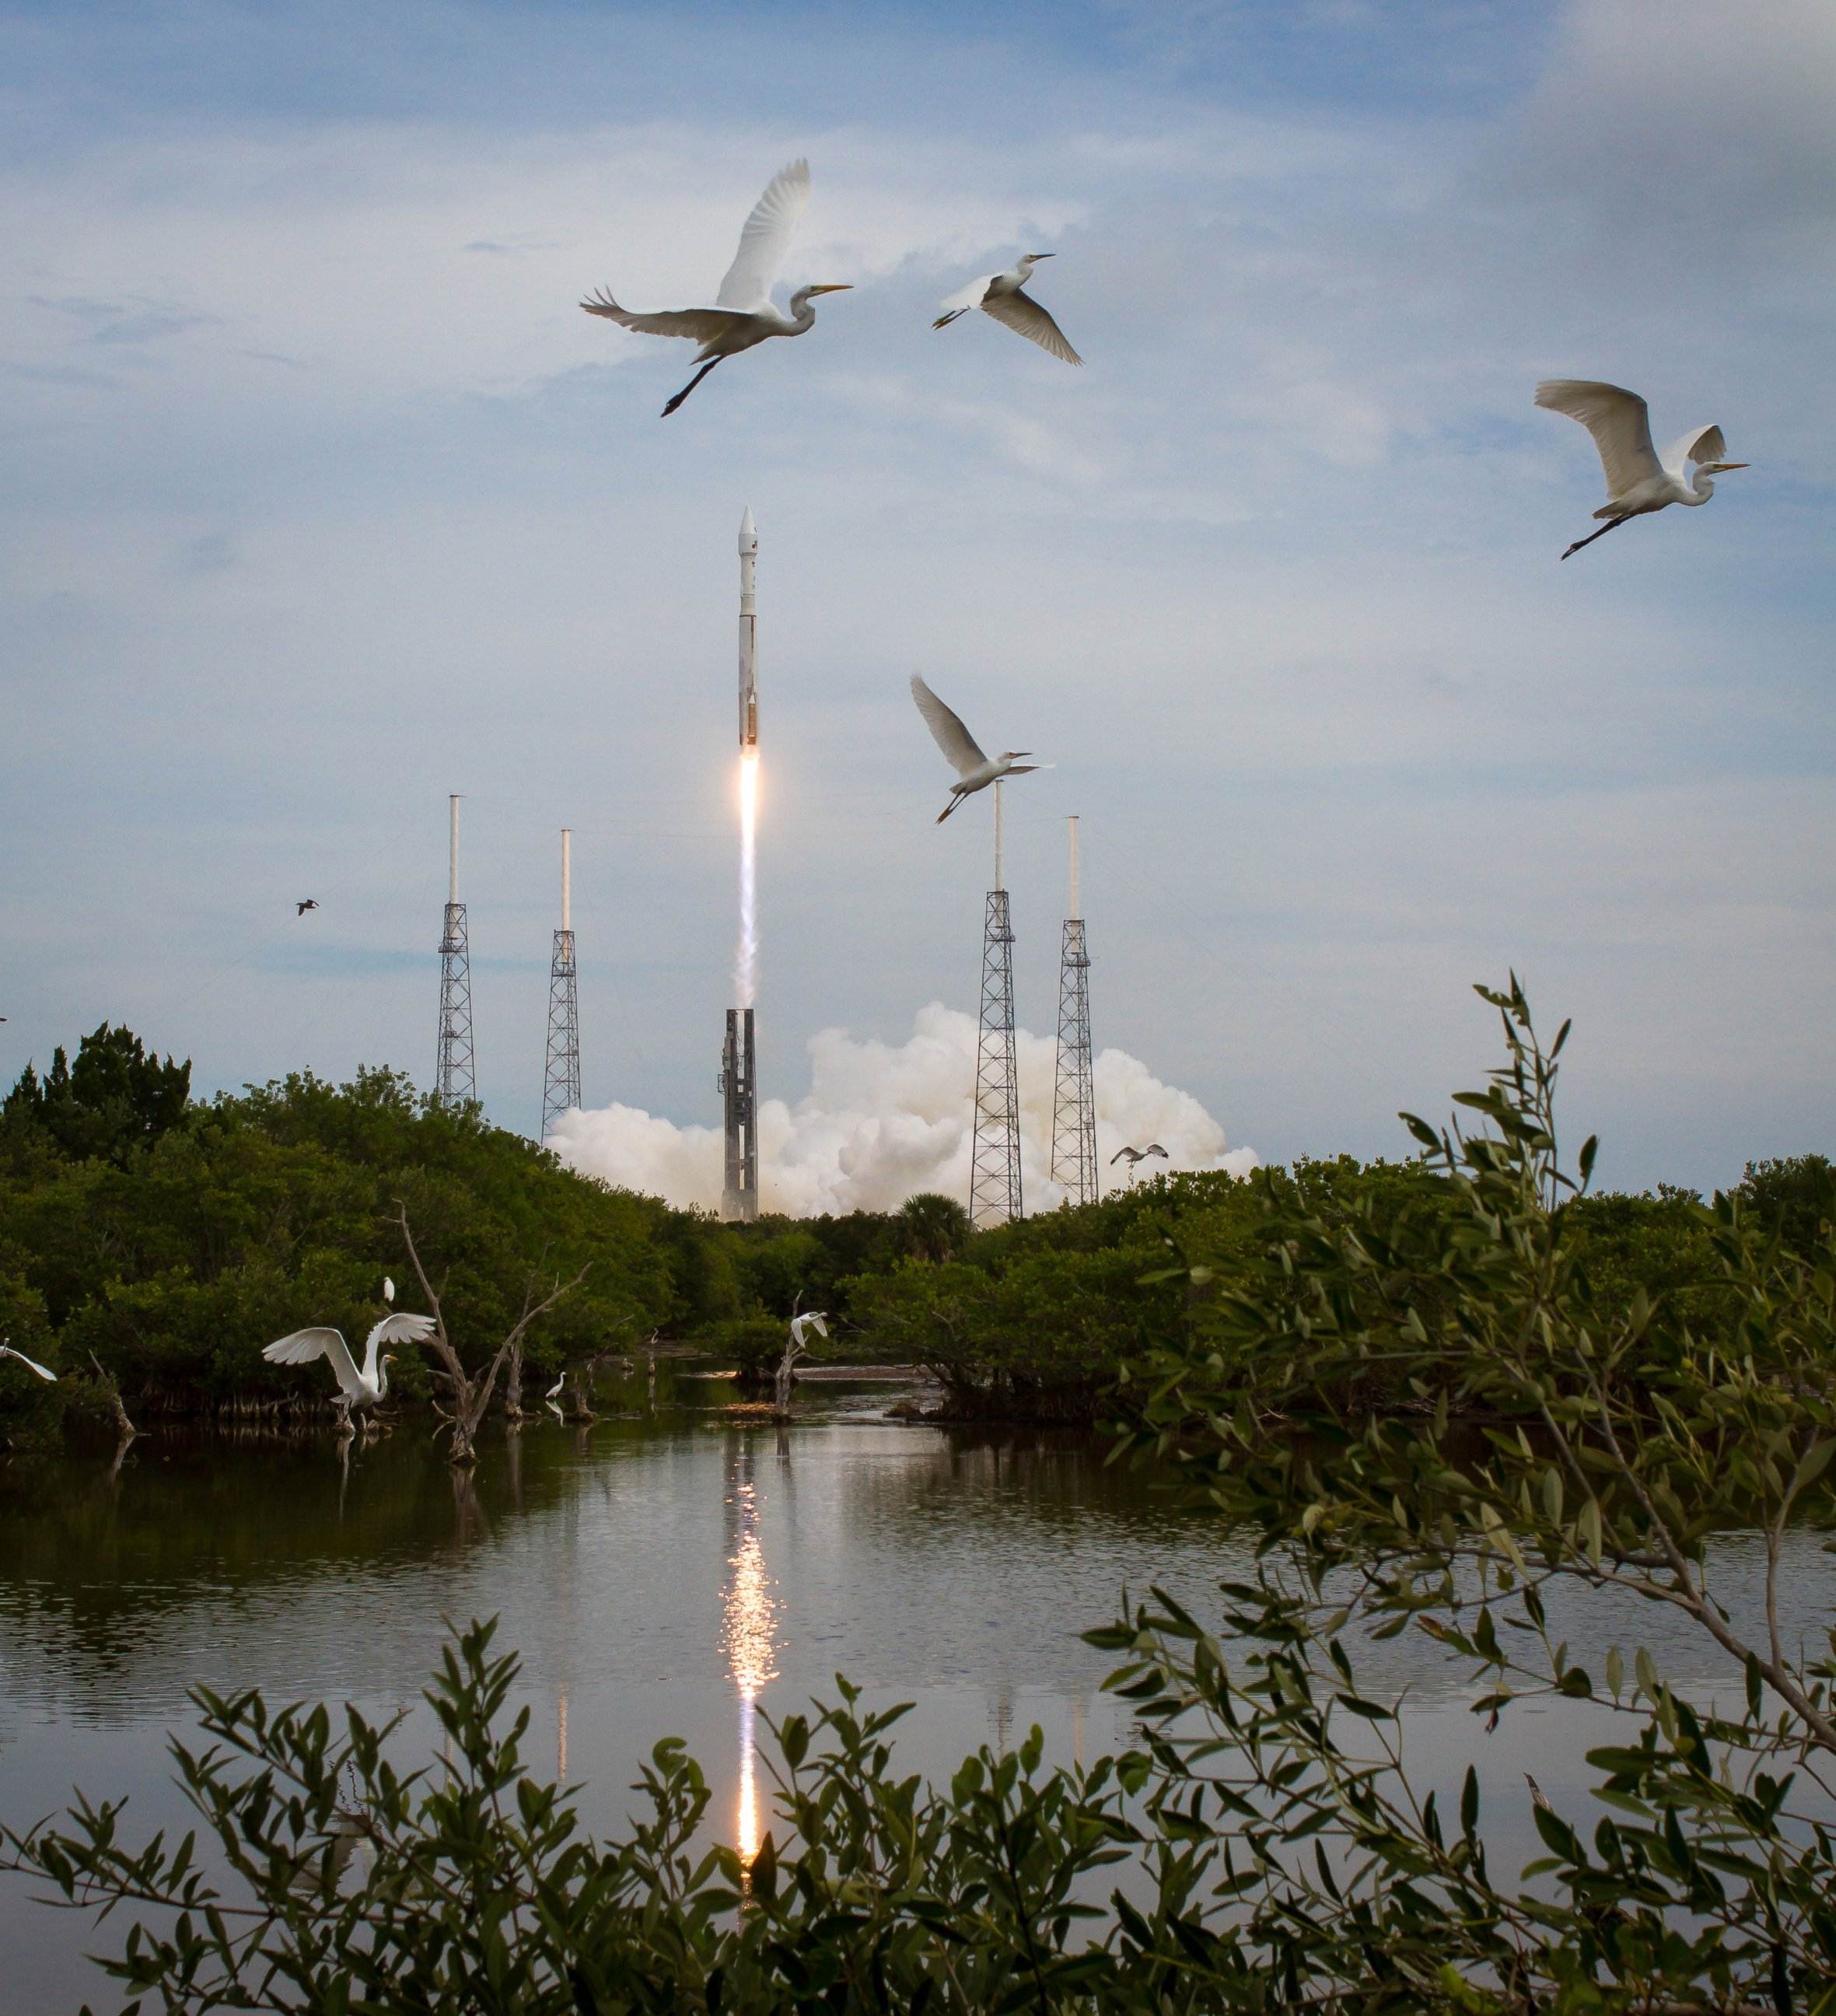 PHOTO: The United Launch Alliance Atlas V rocket with NASA’s Mars Atmosphere and Volatile EvolutioN (MAVEN) spacecraft launches from the Cape Canaveral Air Force Station Space Launch Complex 41 in Cape Canaveral, Florida on Nov. 18, 2013.